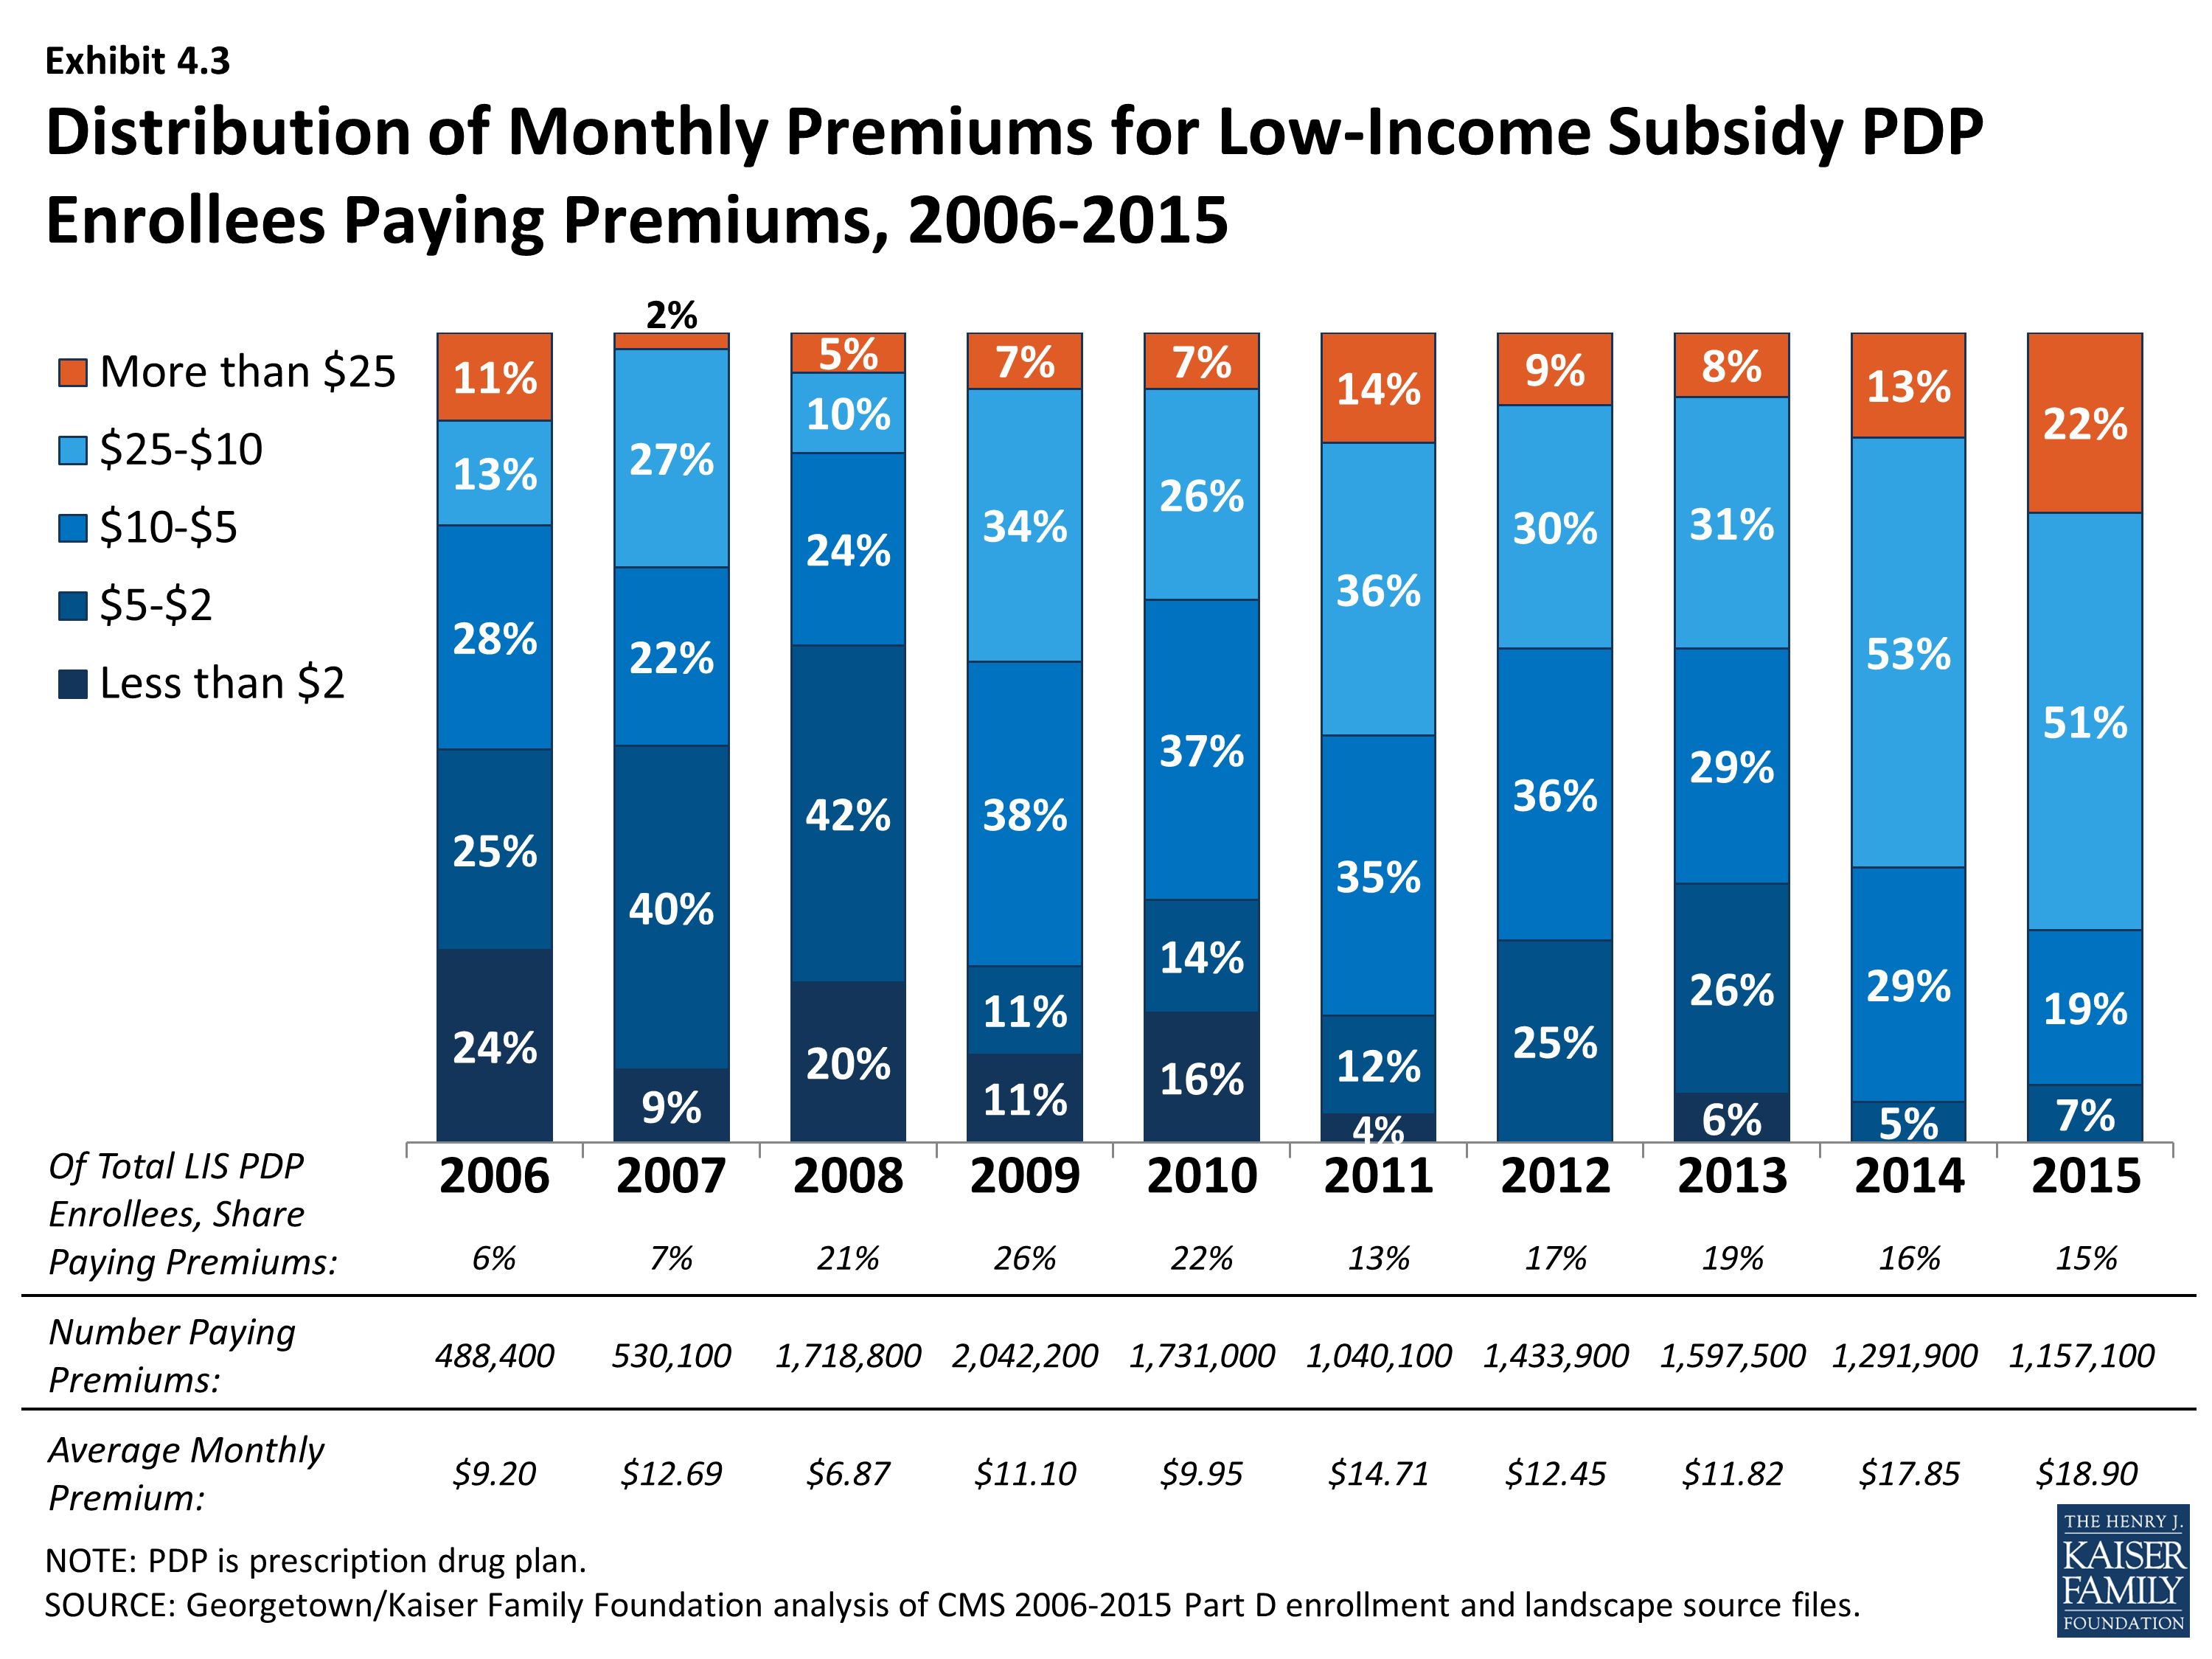 Medicare Part D at Ten Years – Section 4: The Low-Income ...